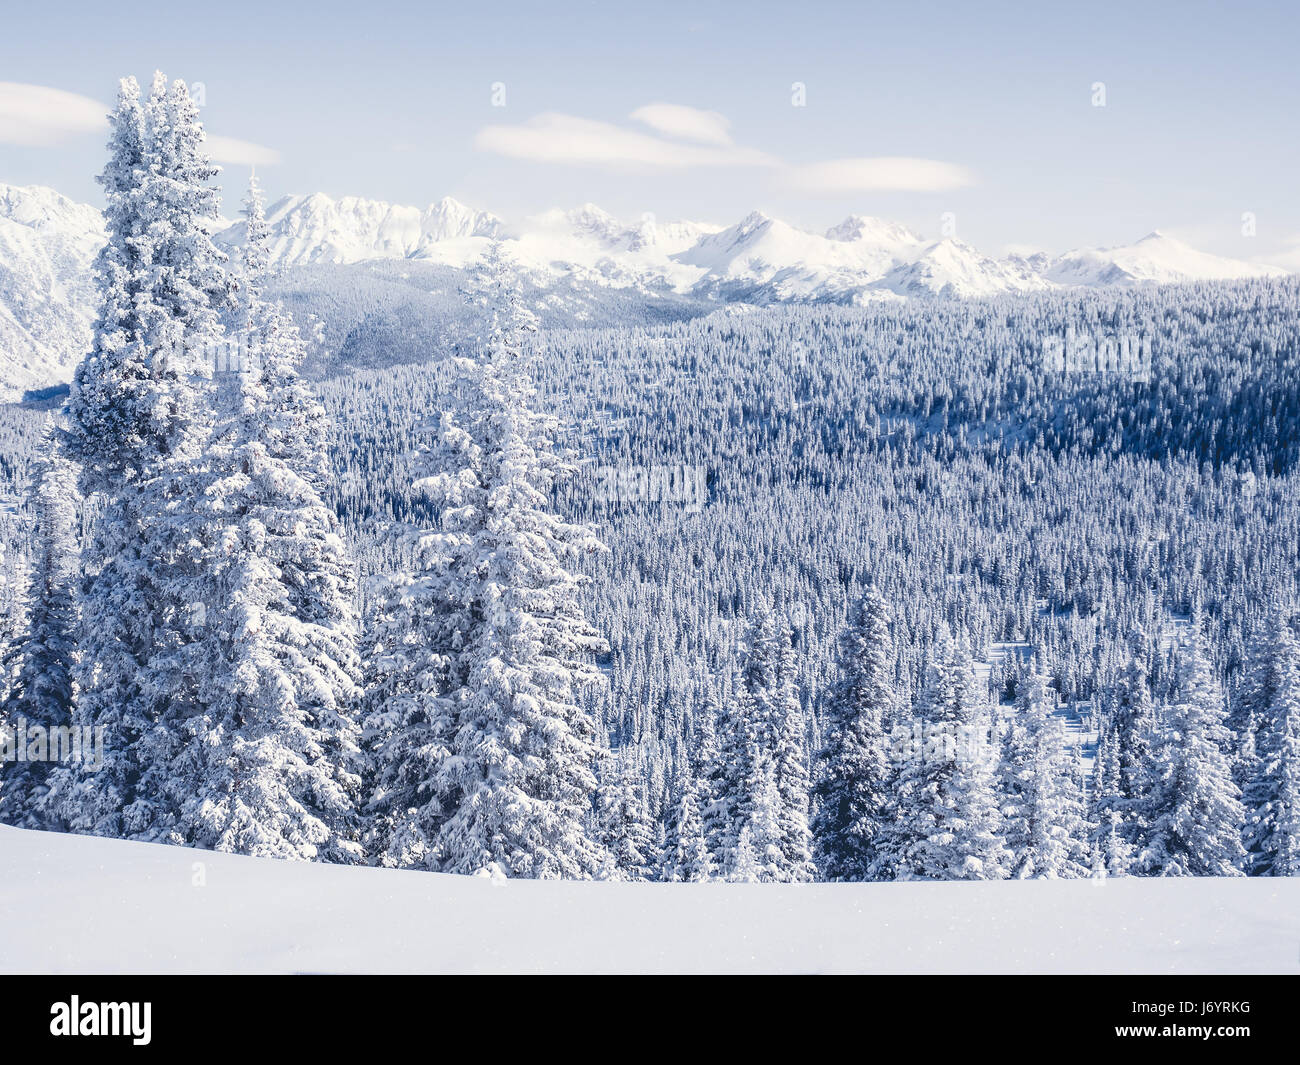 Snow covered landscape and evergreens, Vail, Colorado, United States Stock Photo